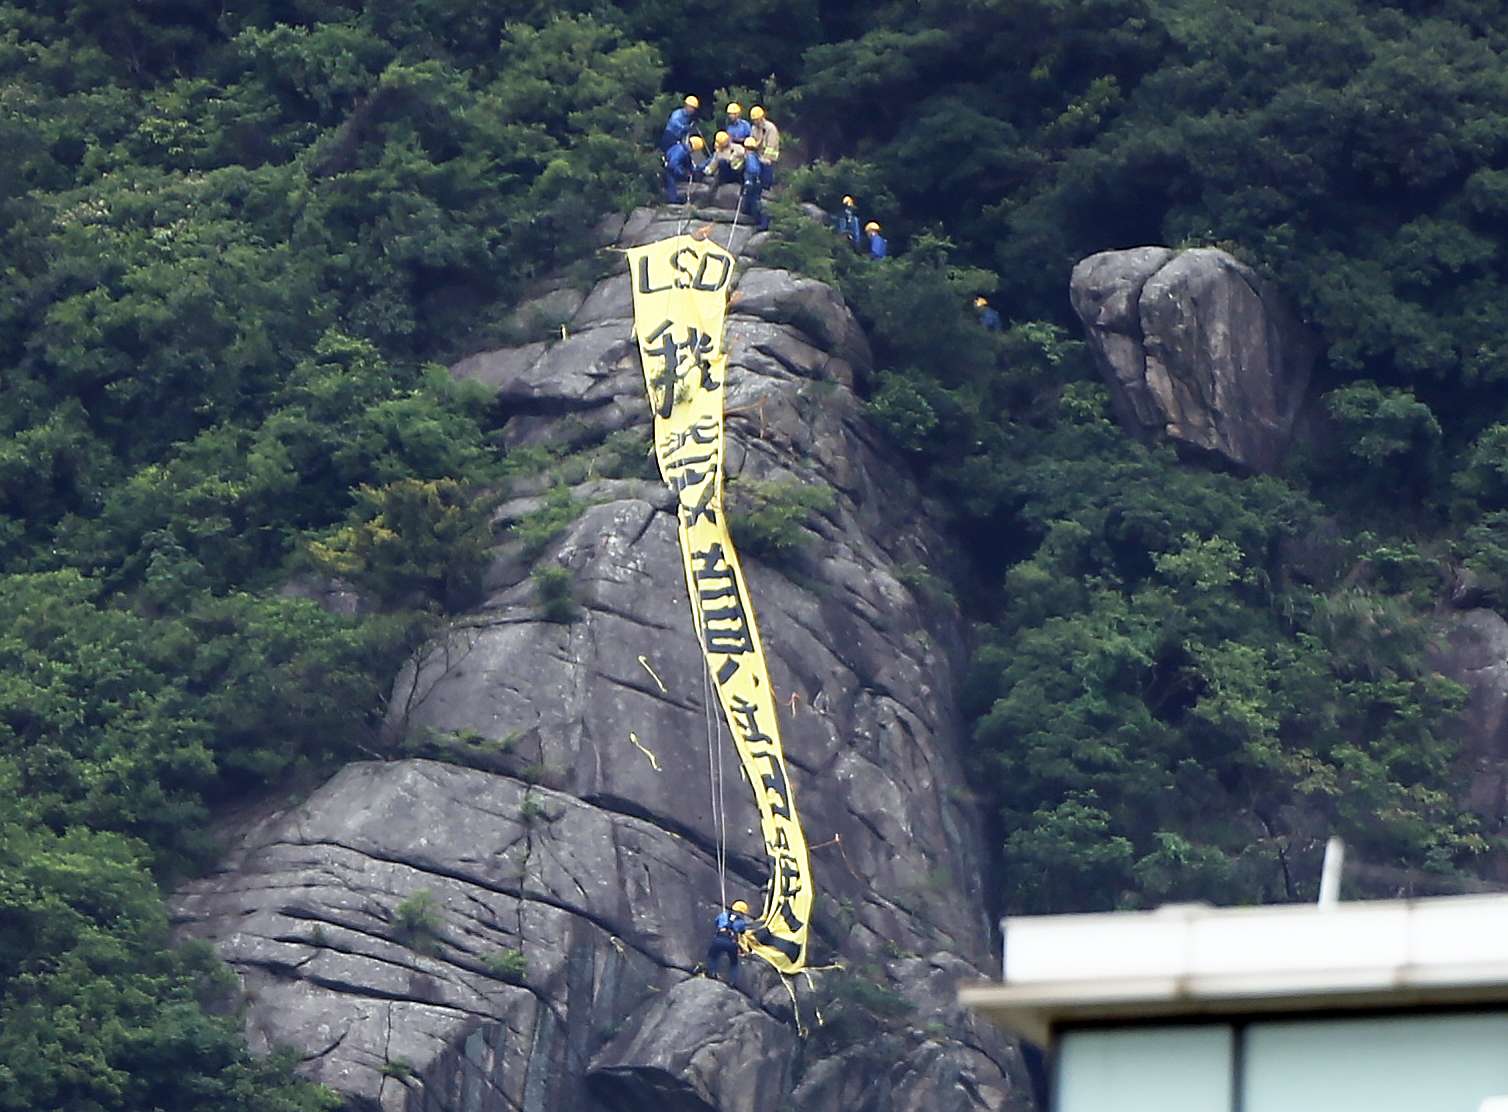 The offending democracy banner put up on Beacon Hill raises questions of law. Photo: Sam Tsang